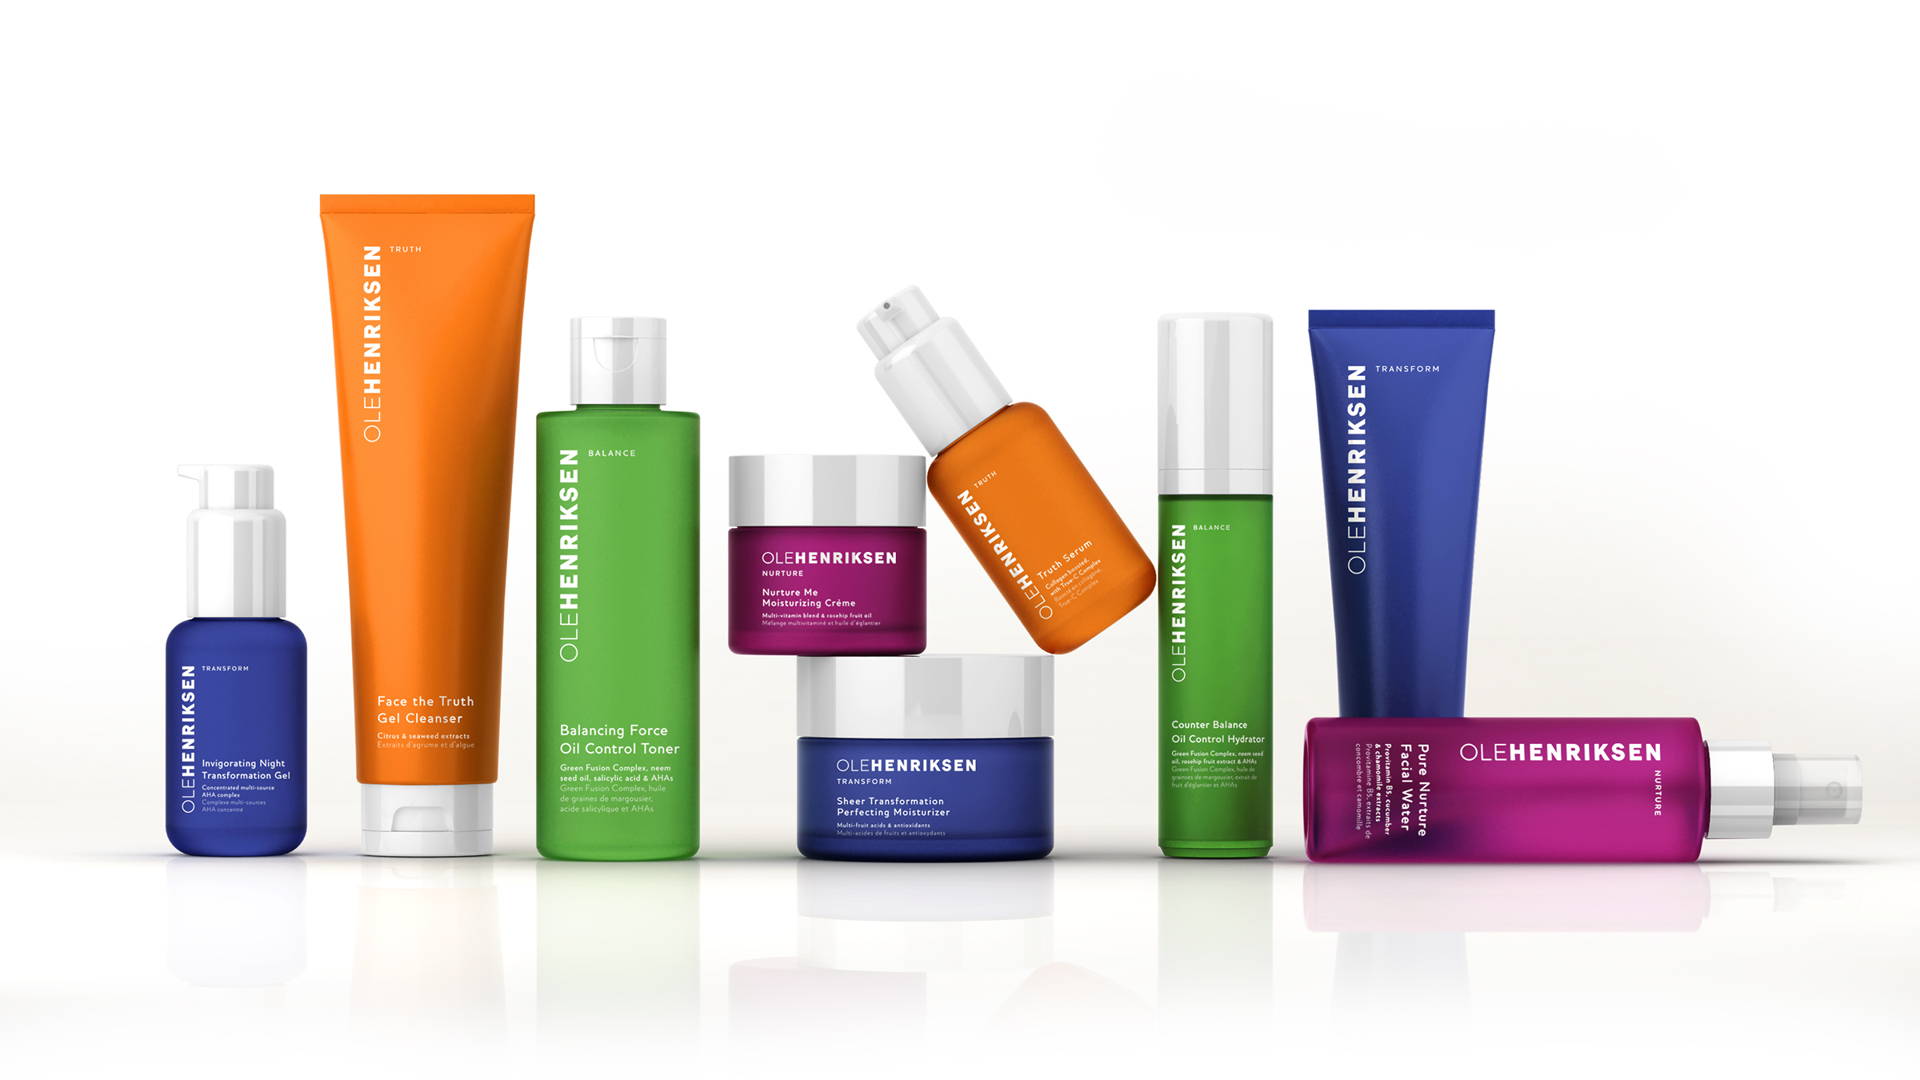 Featured image for Ole Henriksen Skincare Has a Colorful New Look